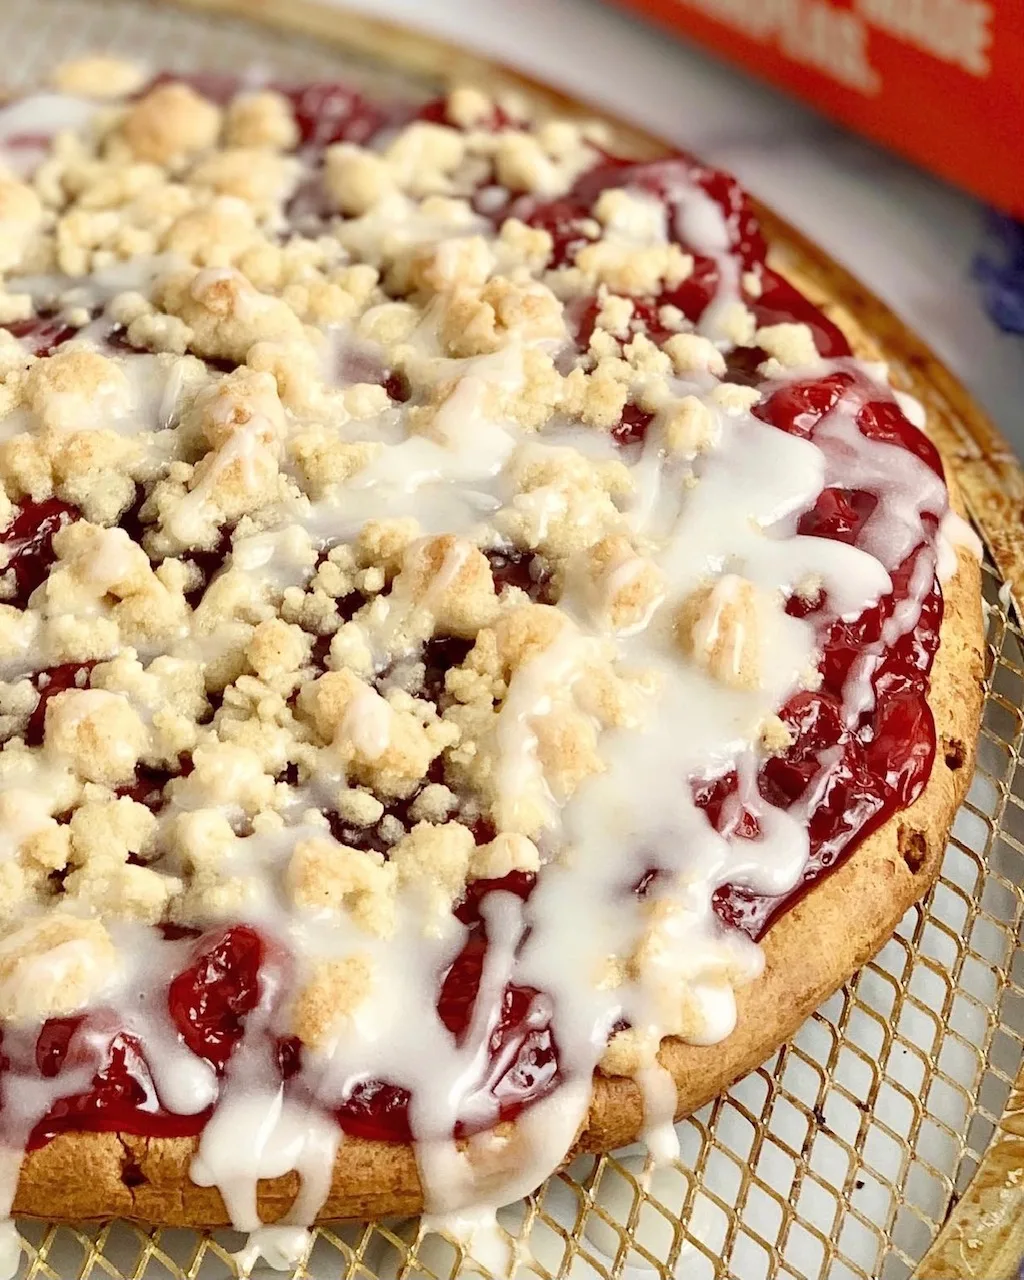 pie crust with cherry pie filling, crumble topping and sweet drizzle on top